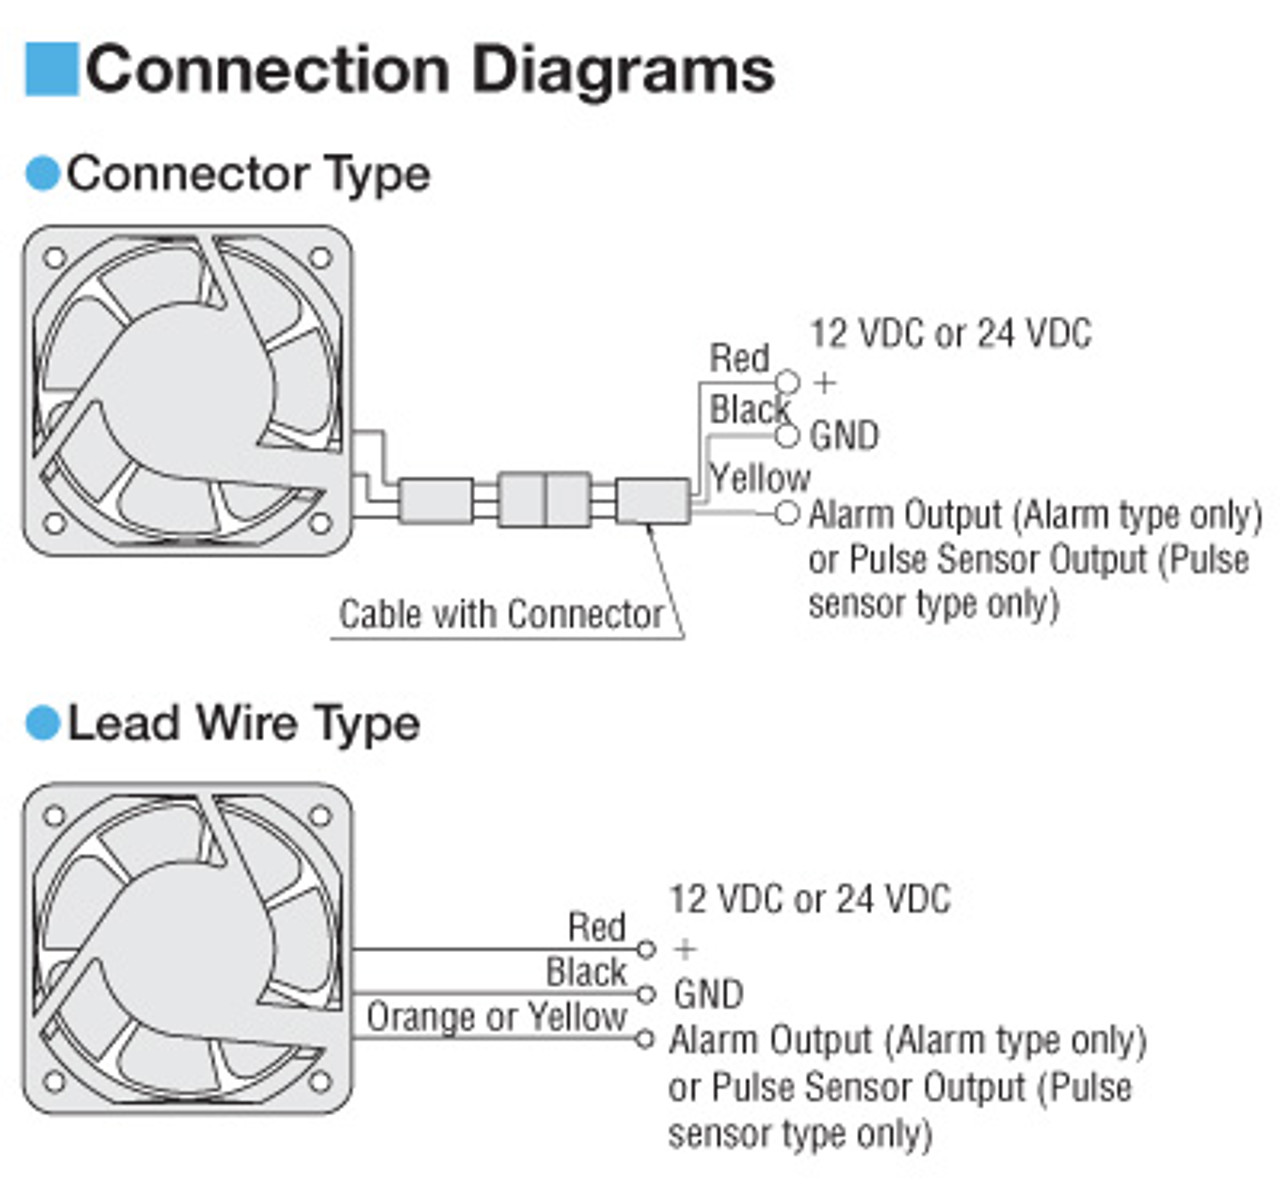 T-MD625BM-12-G - Connection